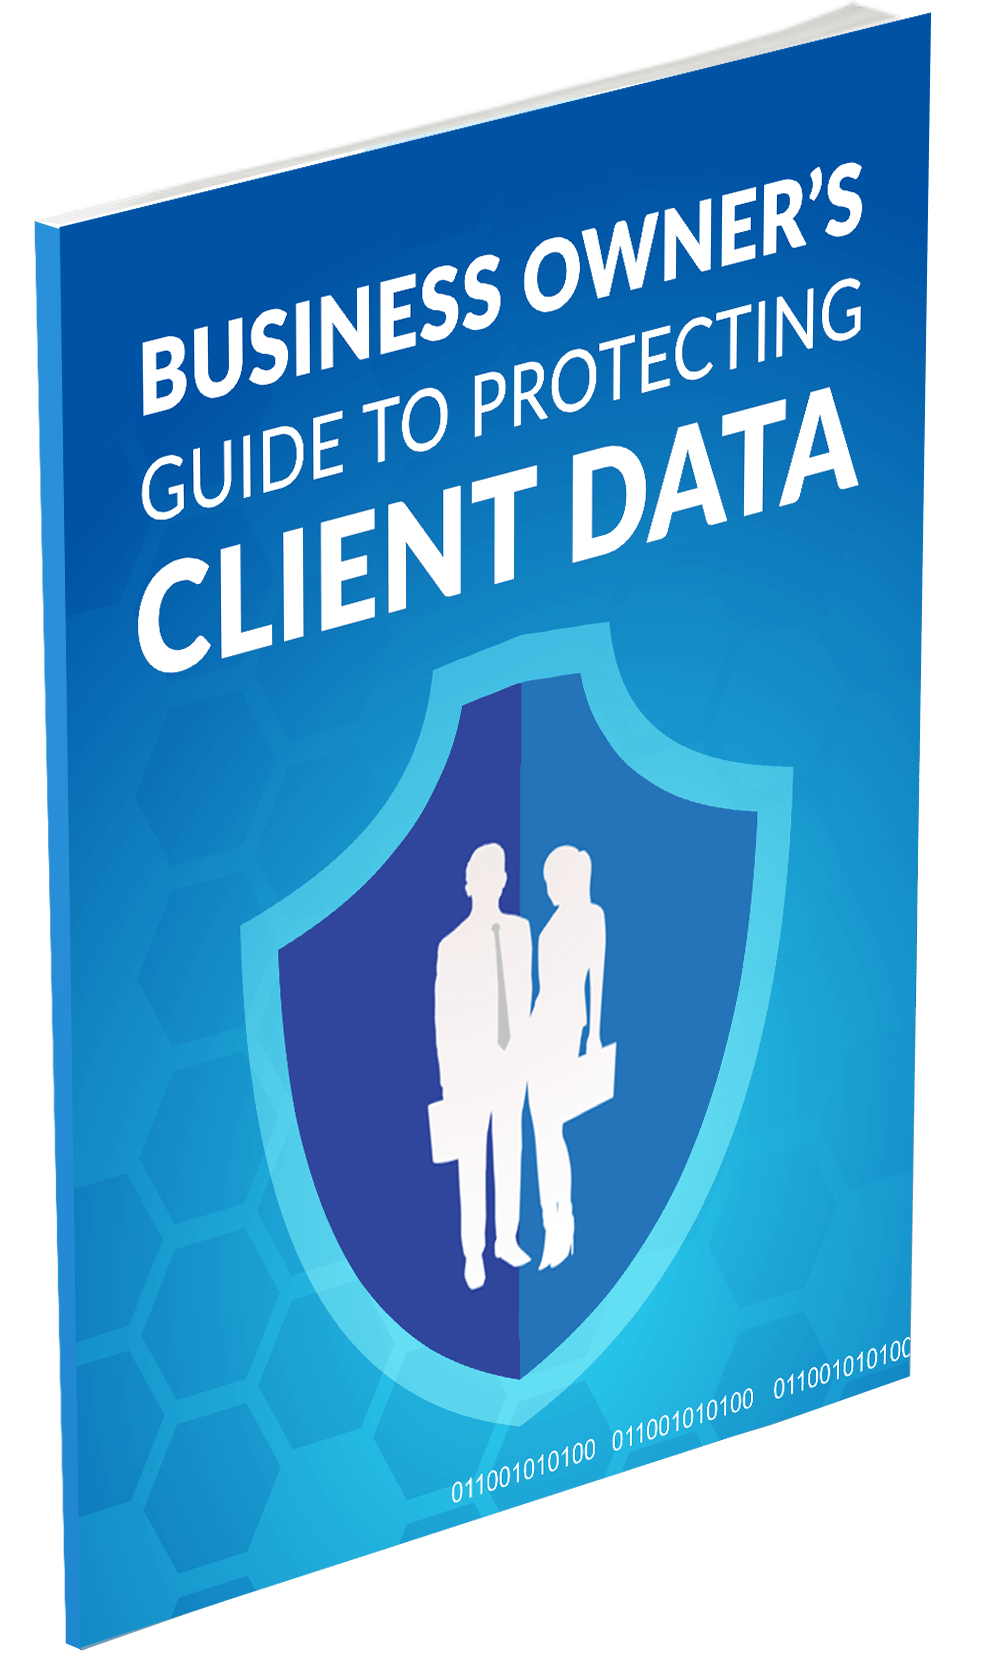 Focus on Protecting Client Data